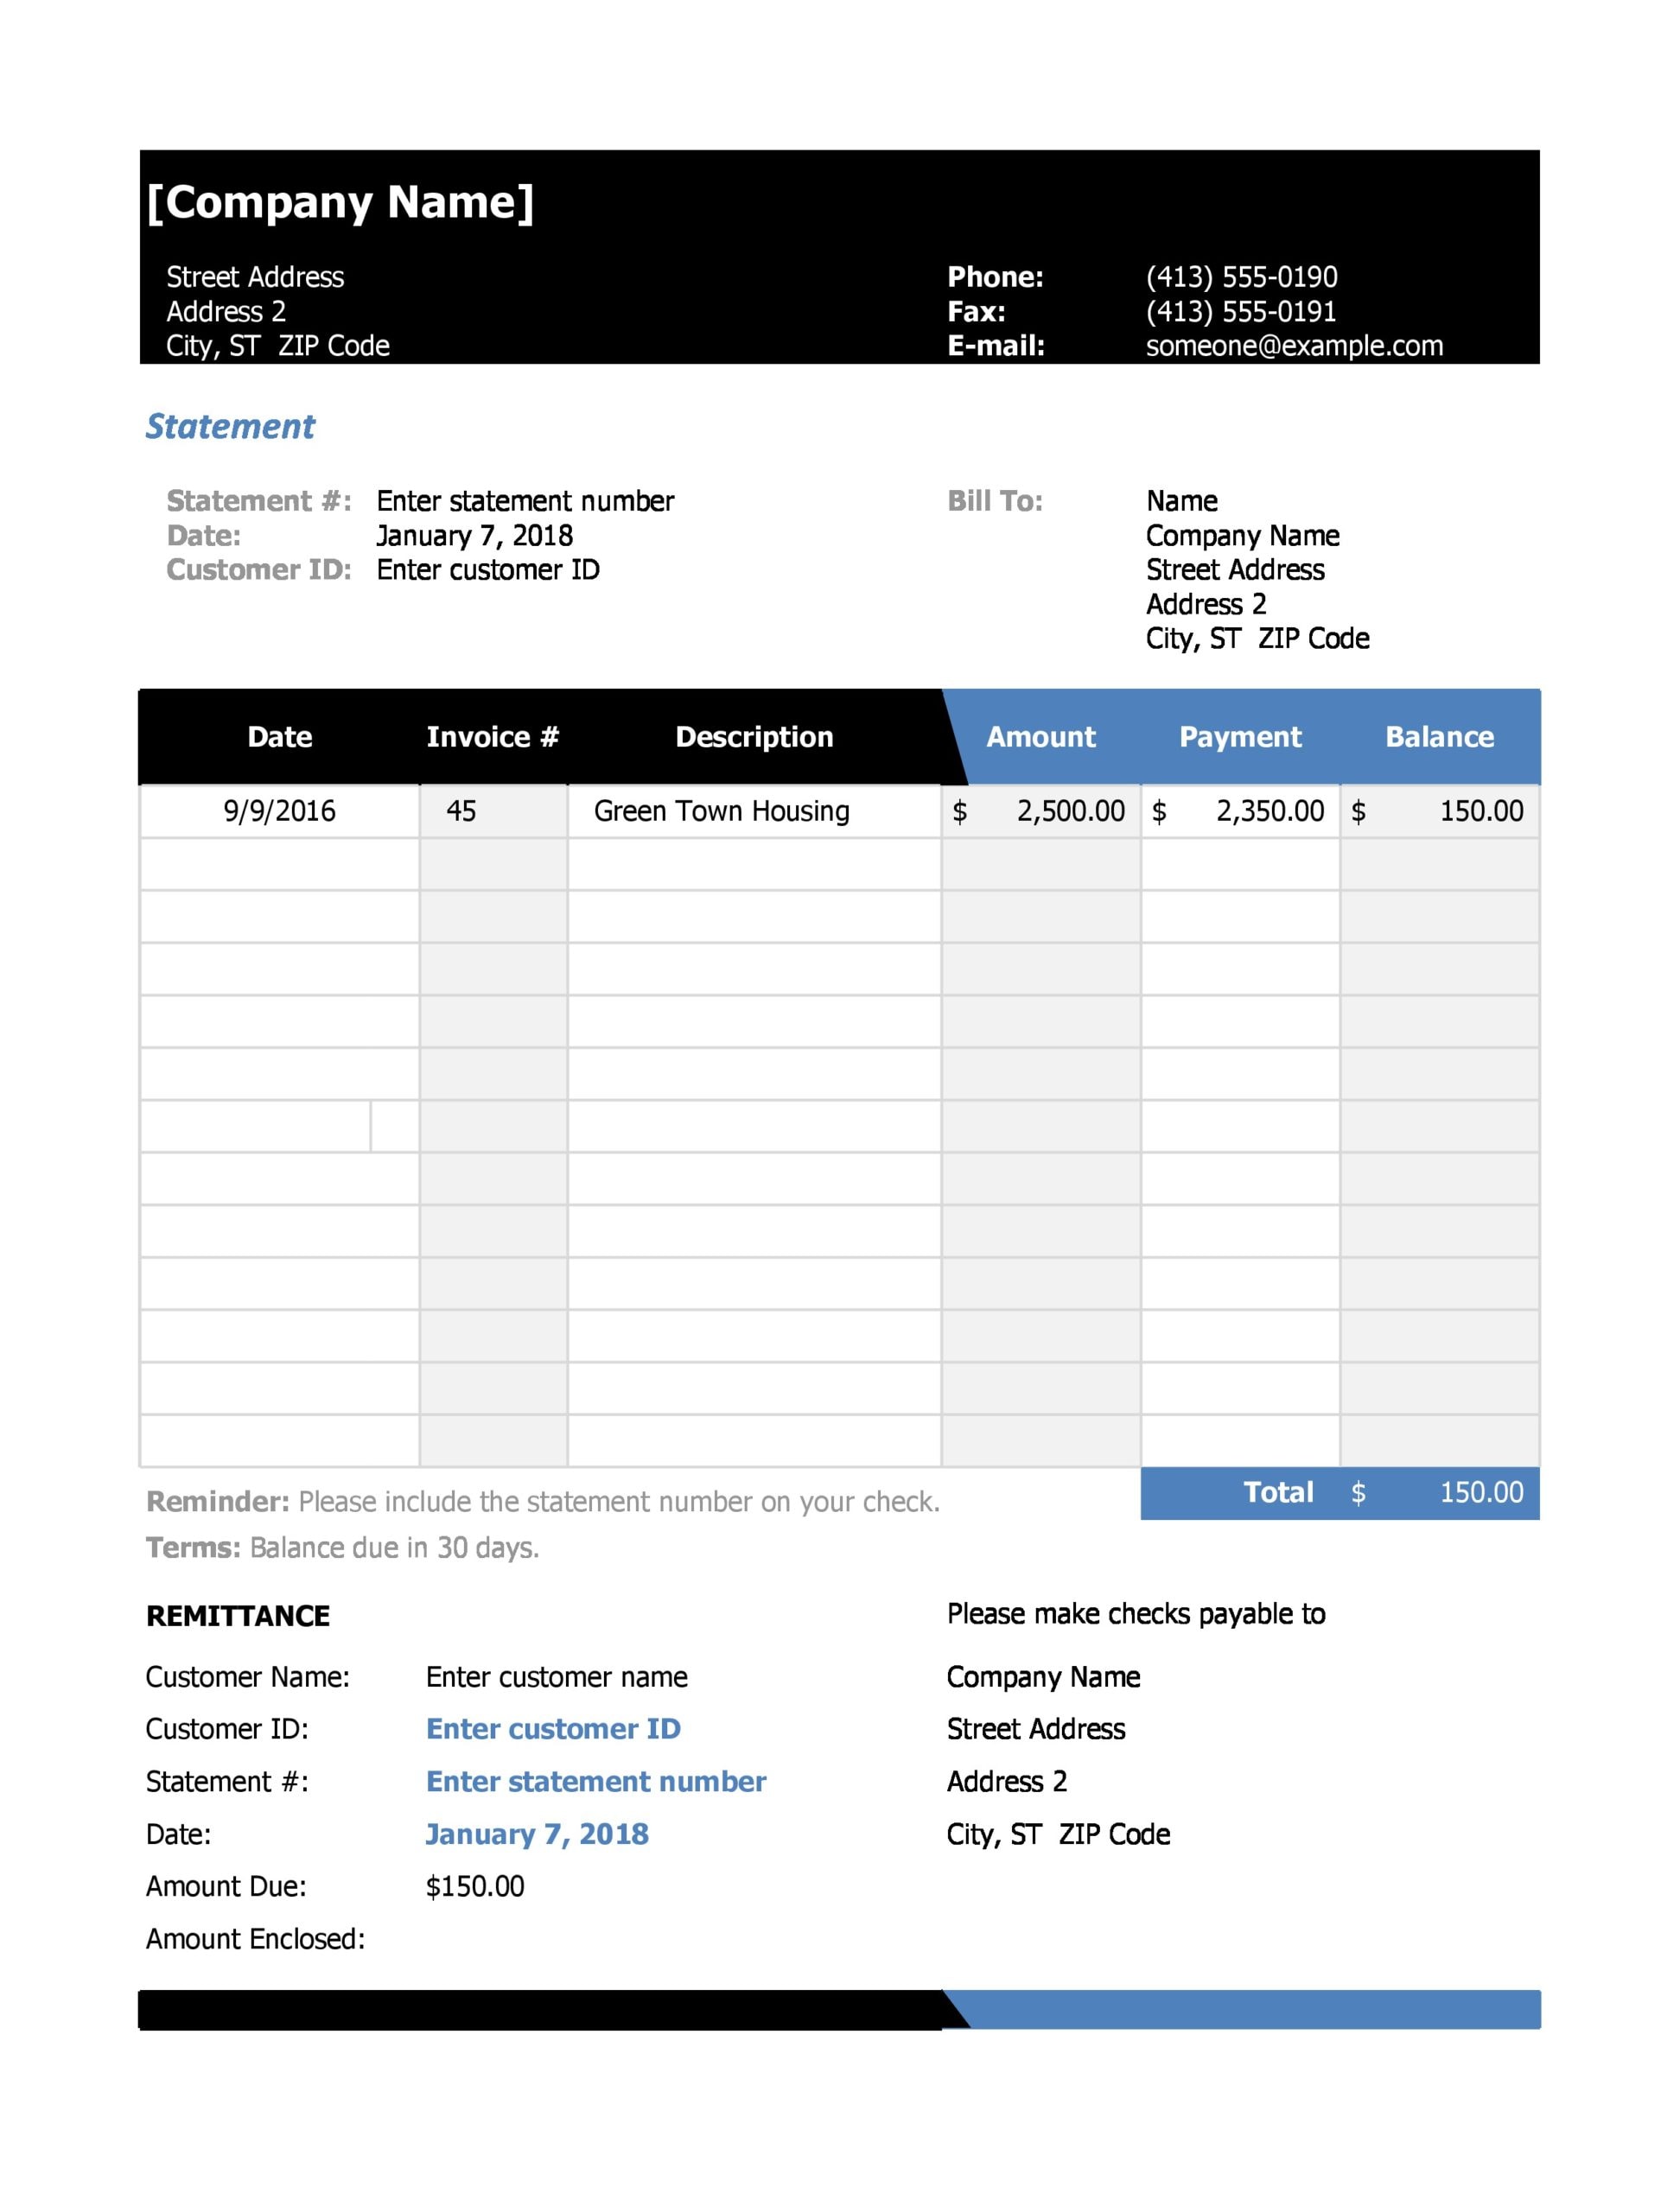 bank statement excel template